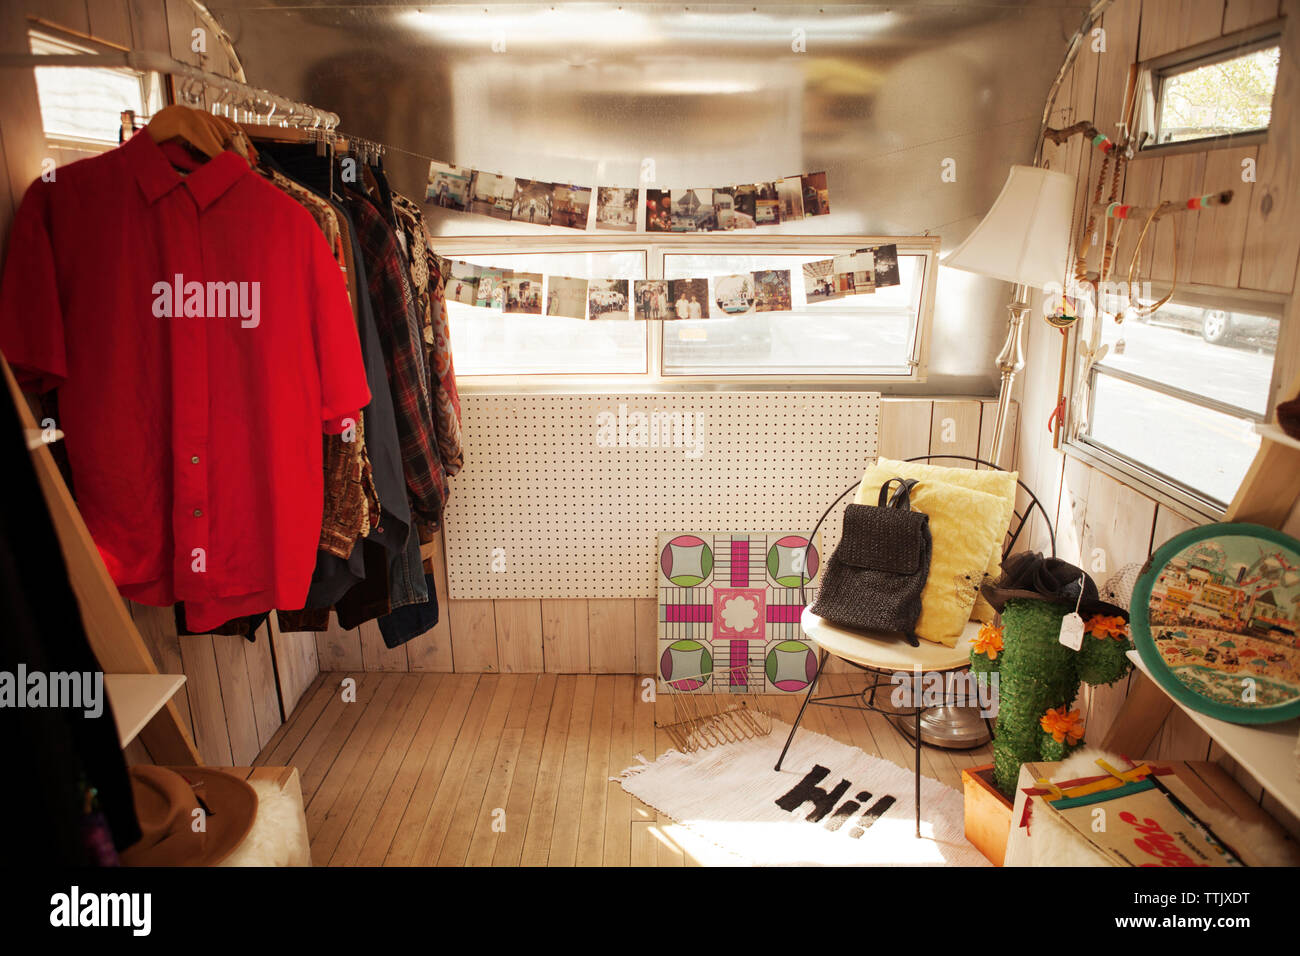 Clothes Rack and photographs in camper van Stock Photo